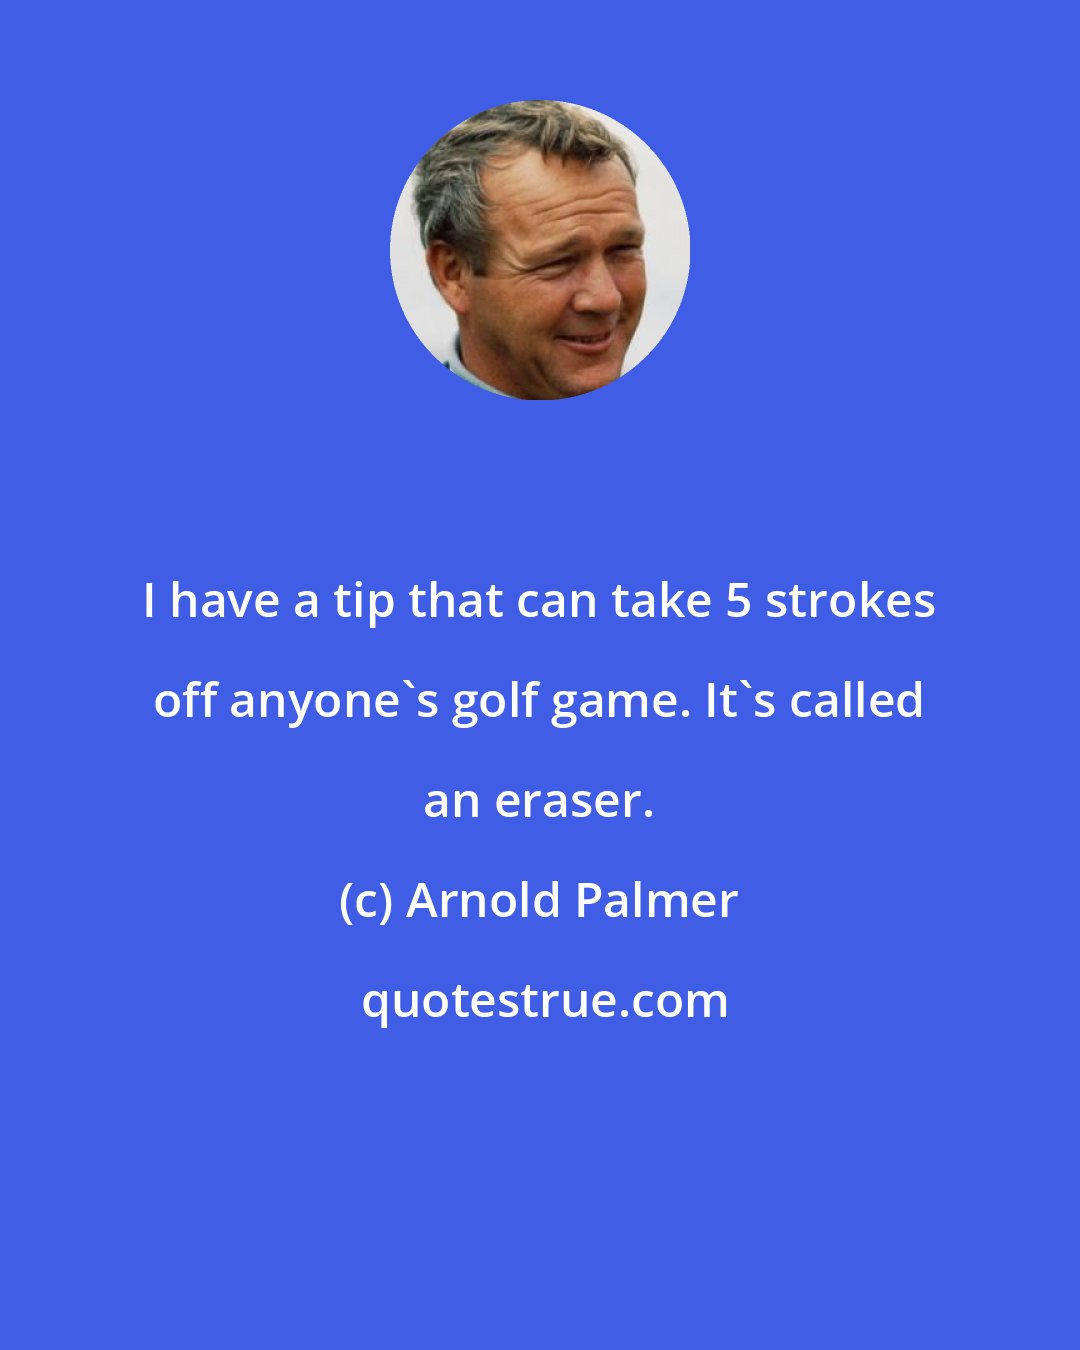 Arnold Palmer: I have a tip that can take 5 strokes off anyone's golf game. It's called an eraser.